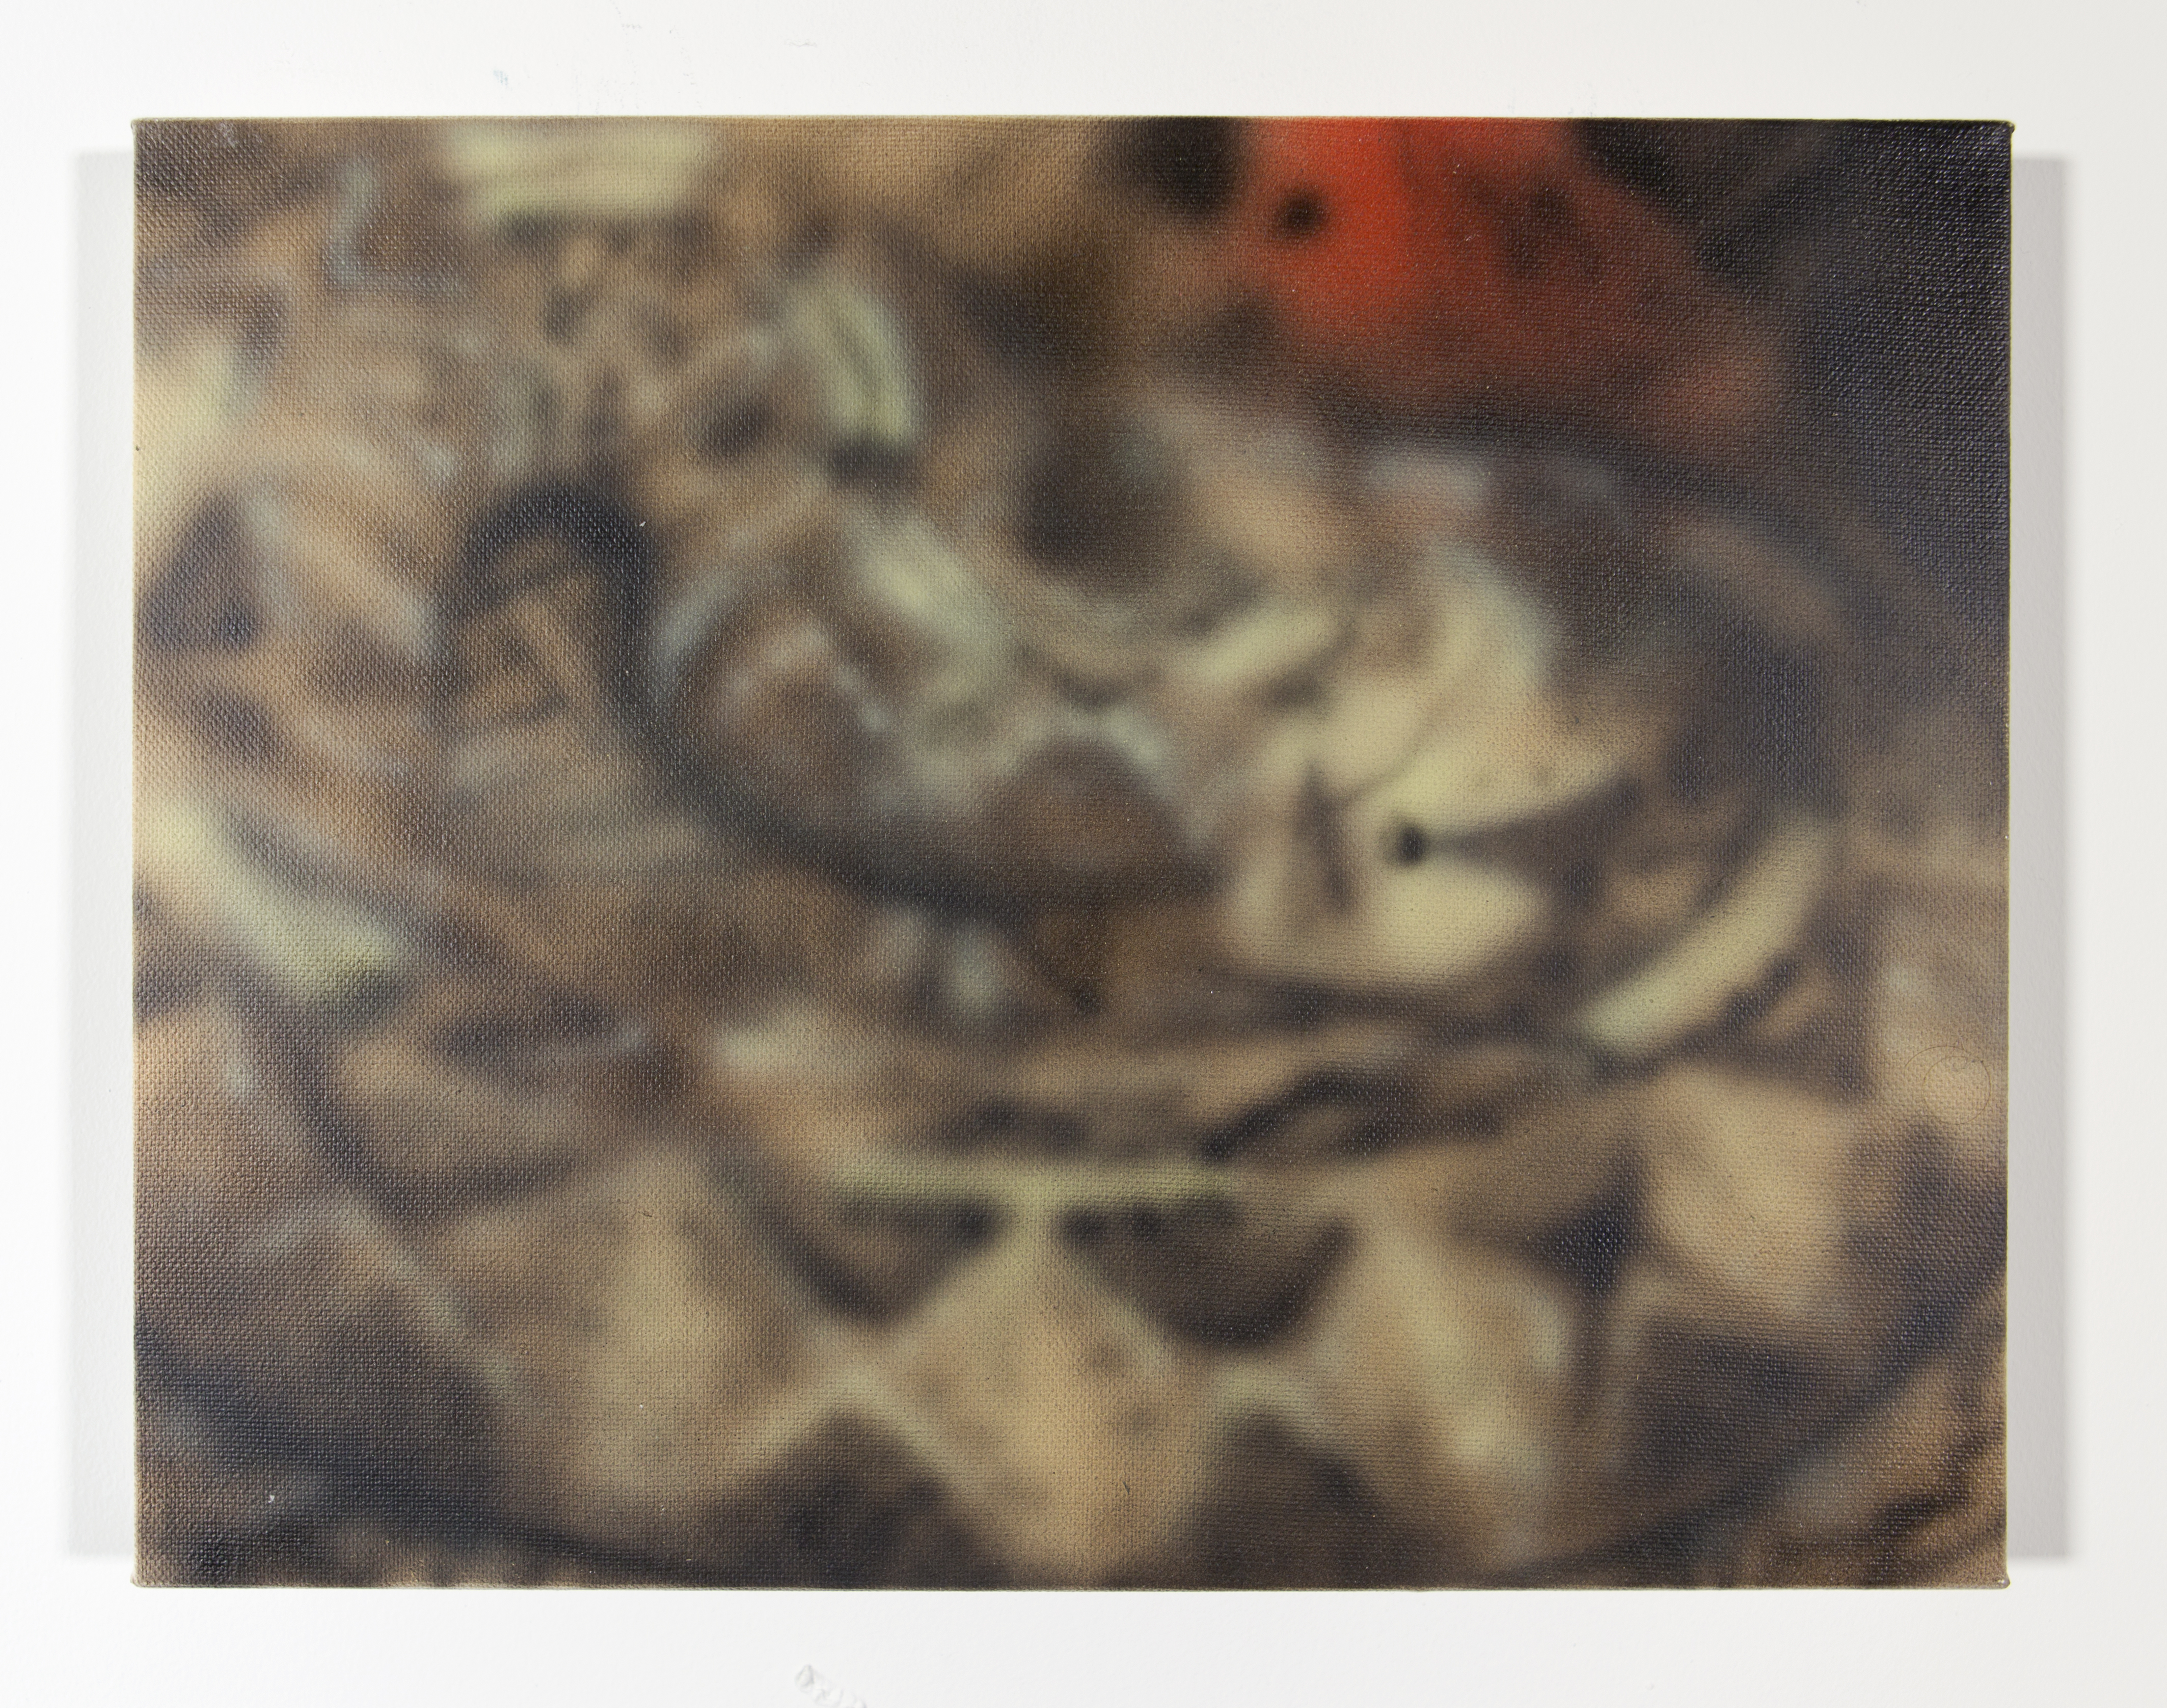 17_guess_whos_coming_to_criticize_dinner_bronx_zoo_rattlesnake_2015_acrylic_on_canvas